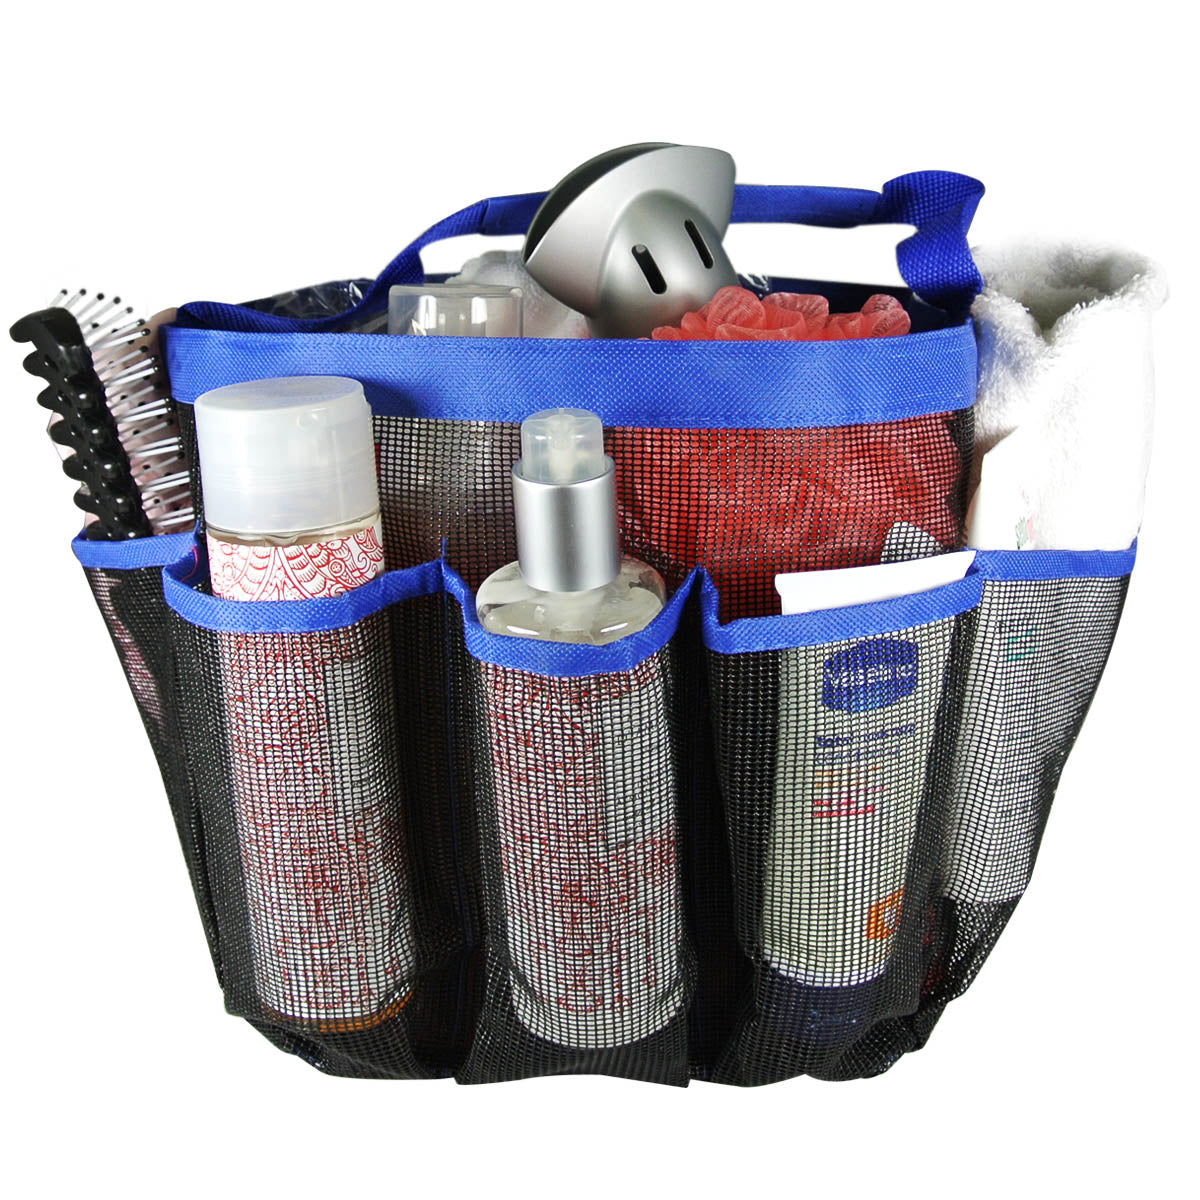 Quick Dry Portable Mesh shower Caddy/Tote/Organizer